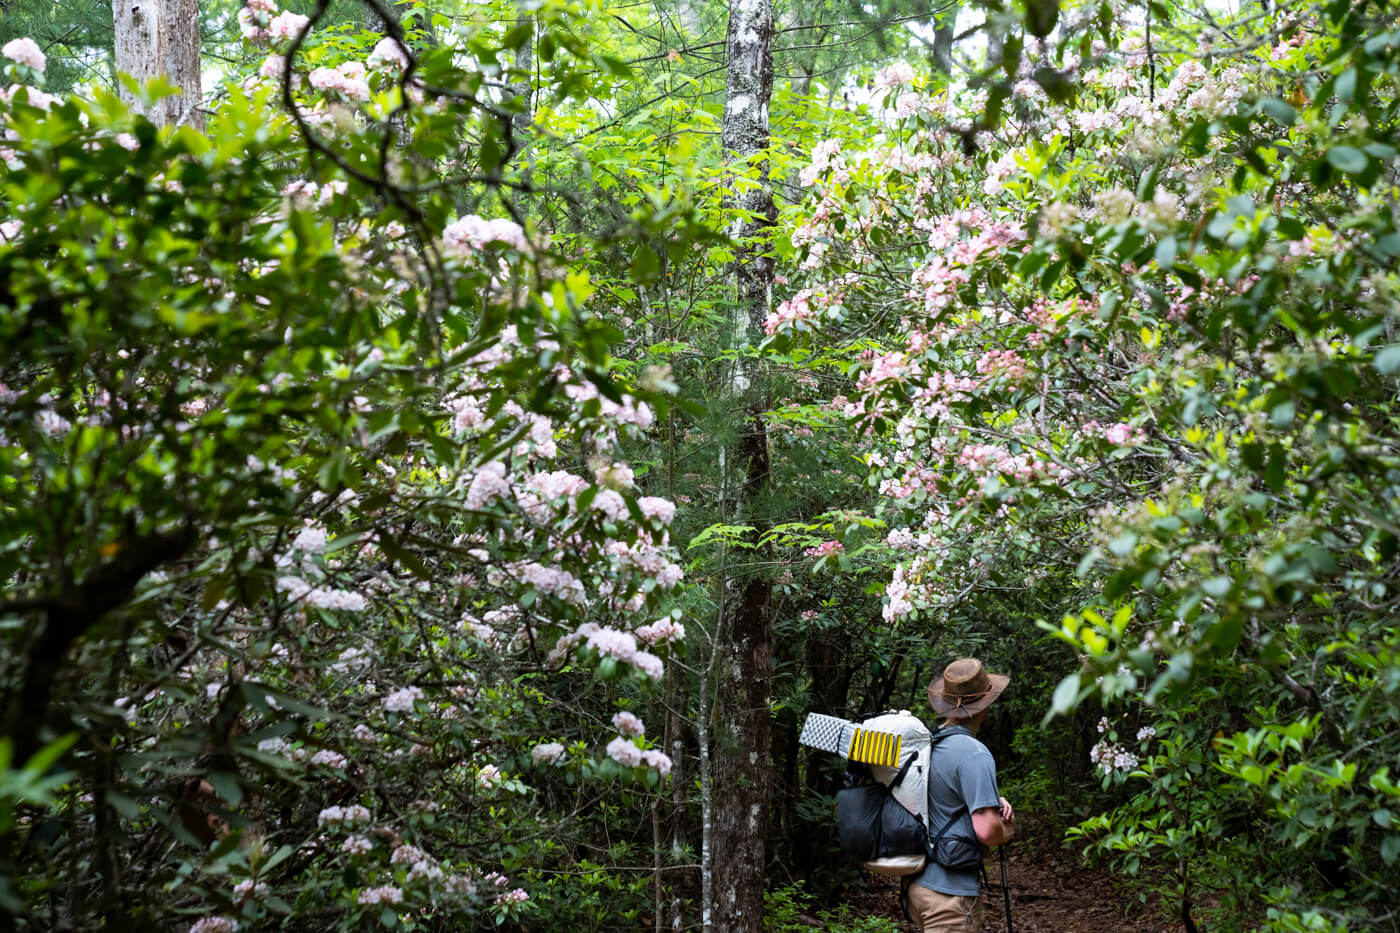 Mountain laurel flowers line the Art Loeb Trail while a hiker stops to admire the blooms in Western North Carolina